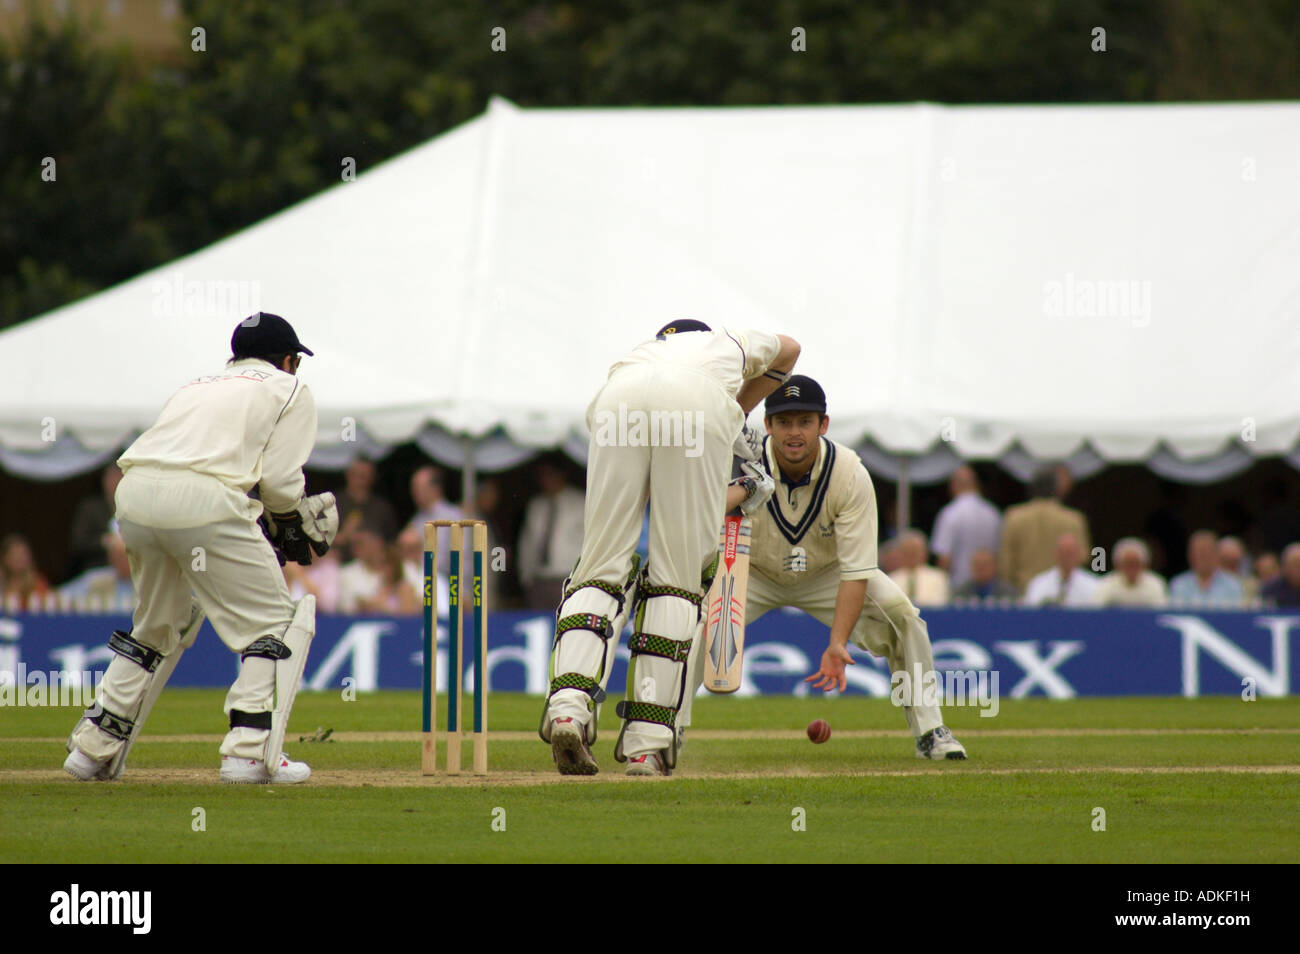 County cricket game. Middlesex v Derbyshire. Chad Keegan fielding. Stock Photo